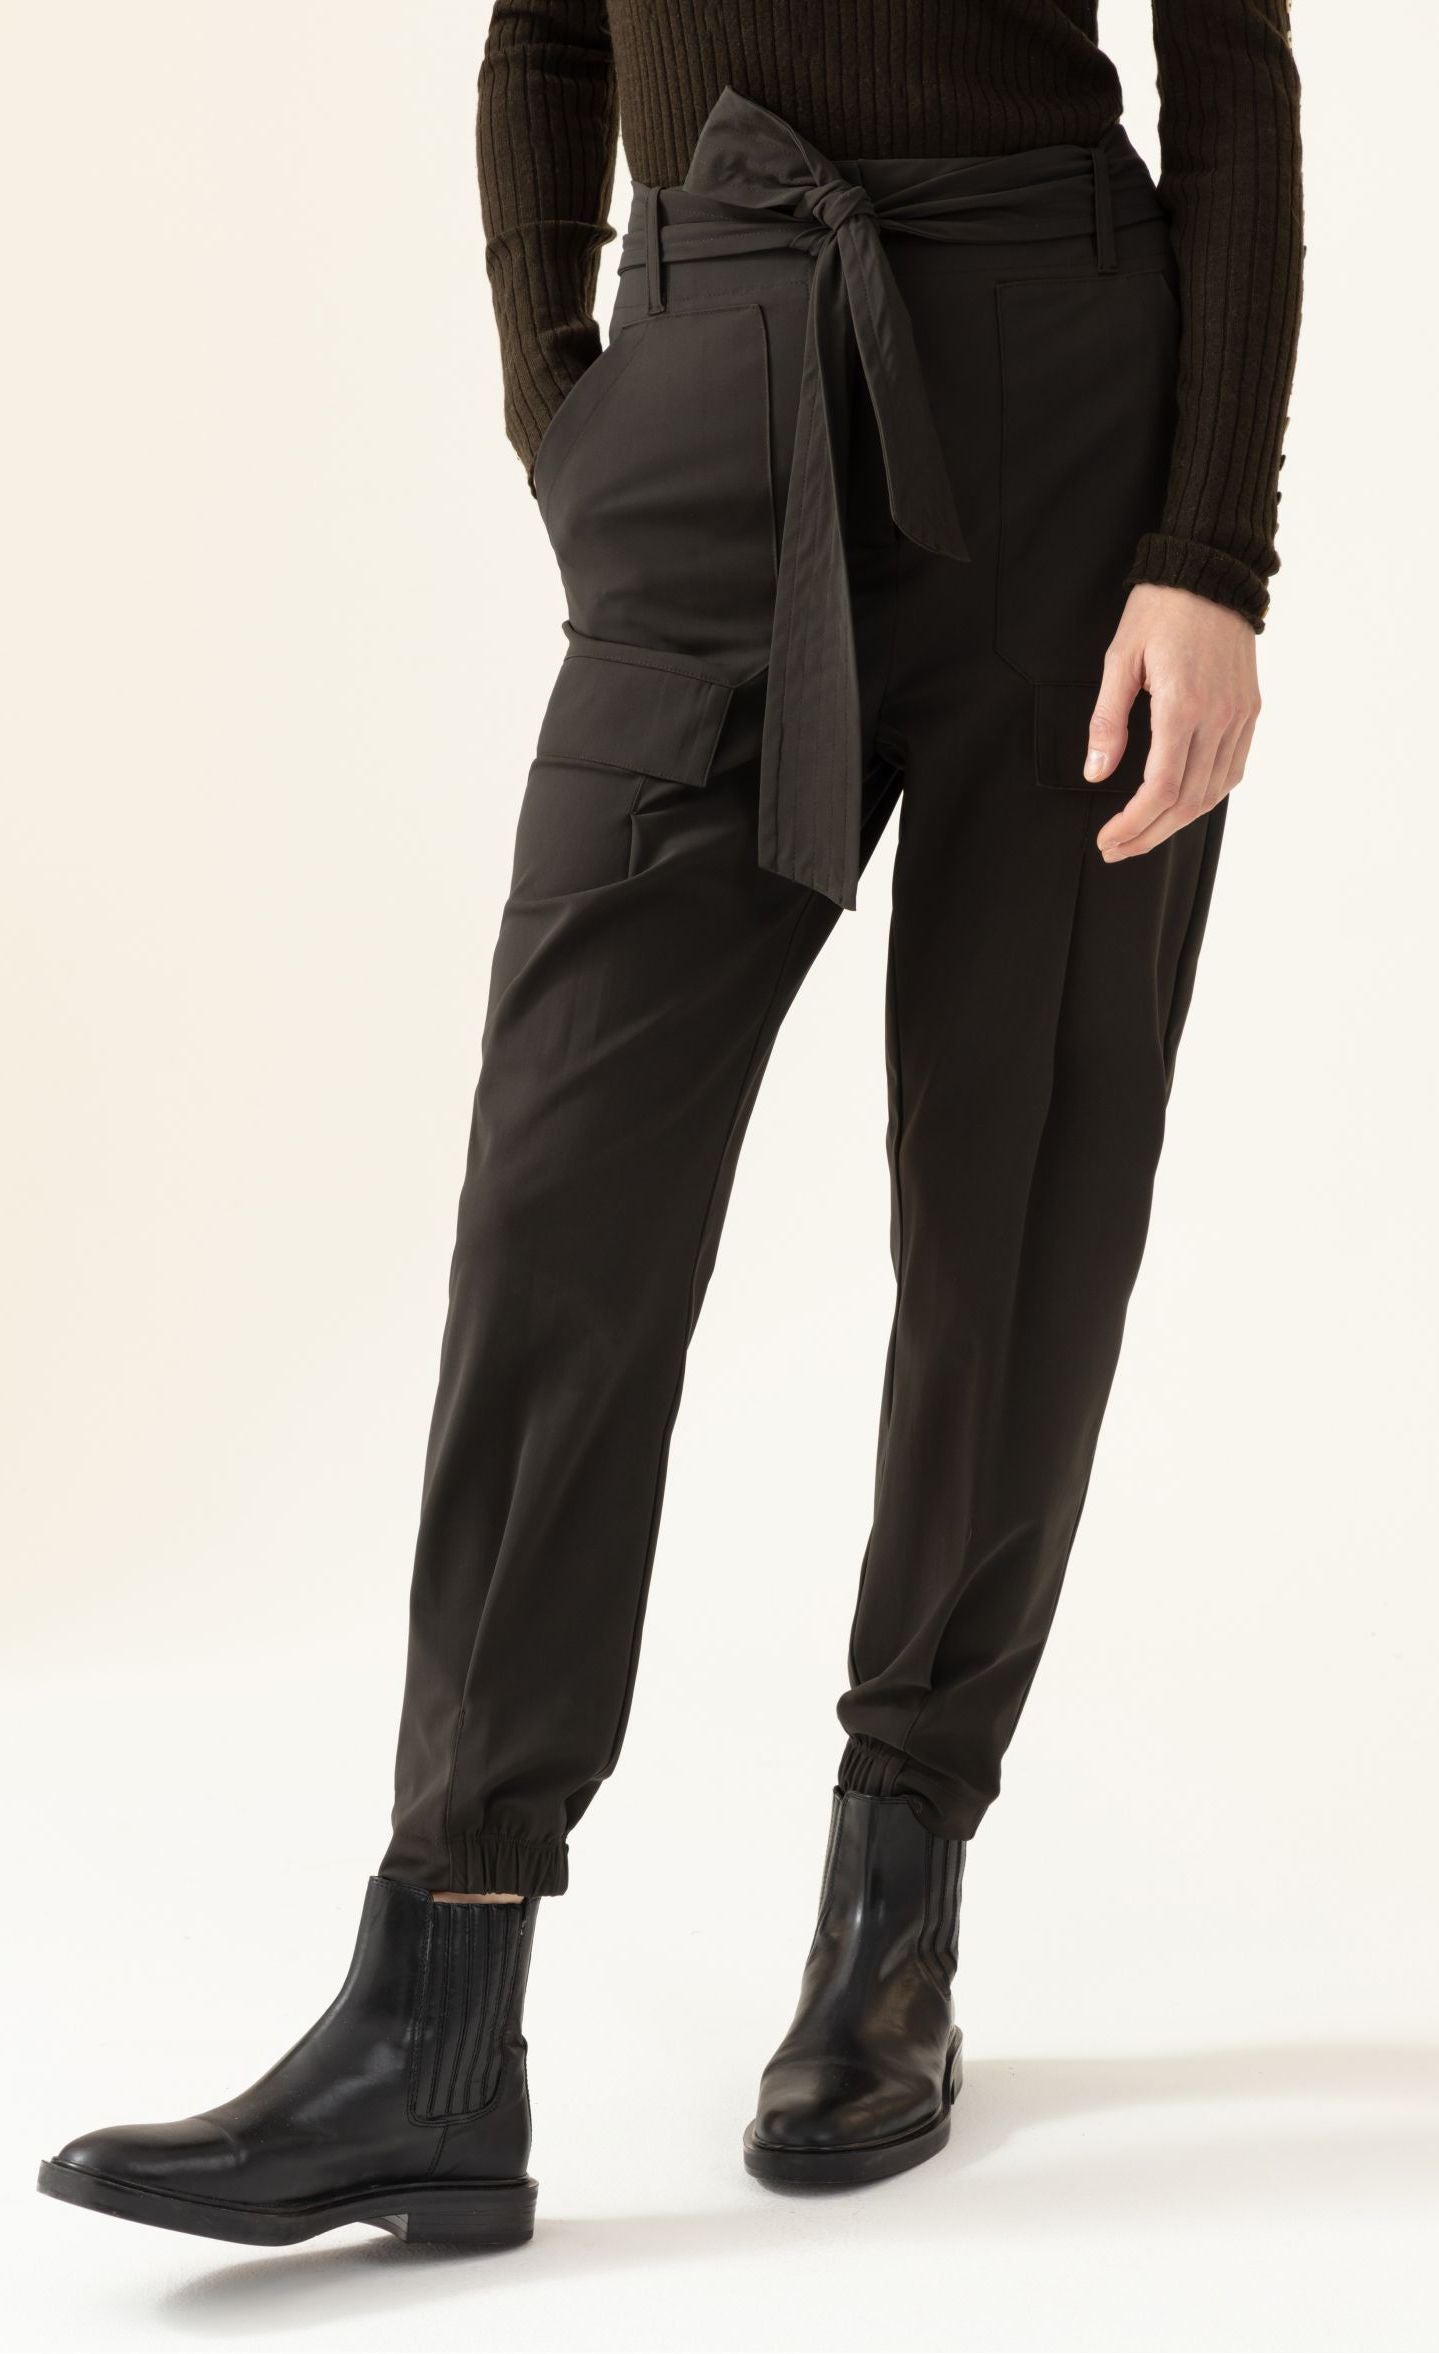 Front bottom half view of a woman wearing the indies luna kaki pant. These pants have a large waistband with a tie belt, front patch pockets, a relaxed fit, and a tapered elastic hem.